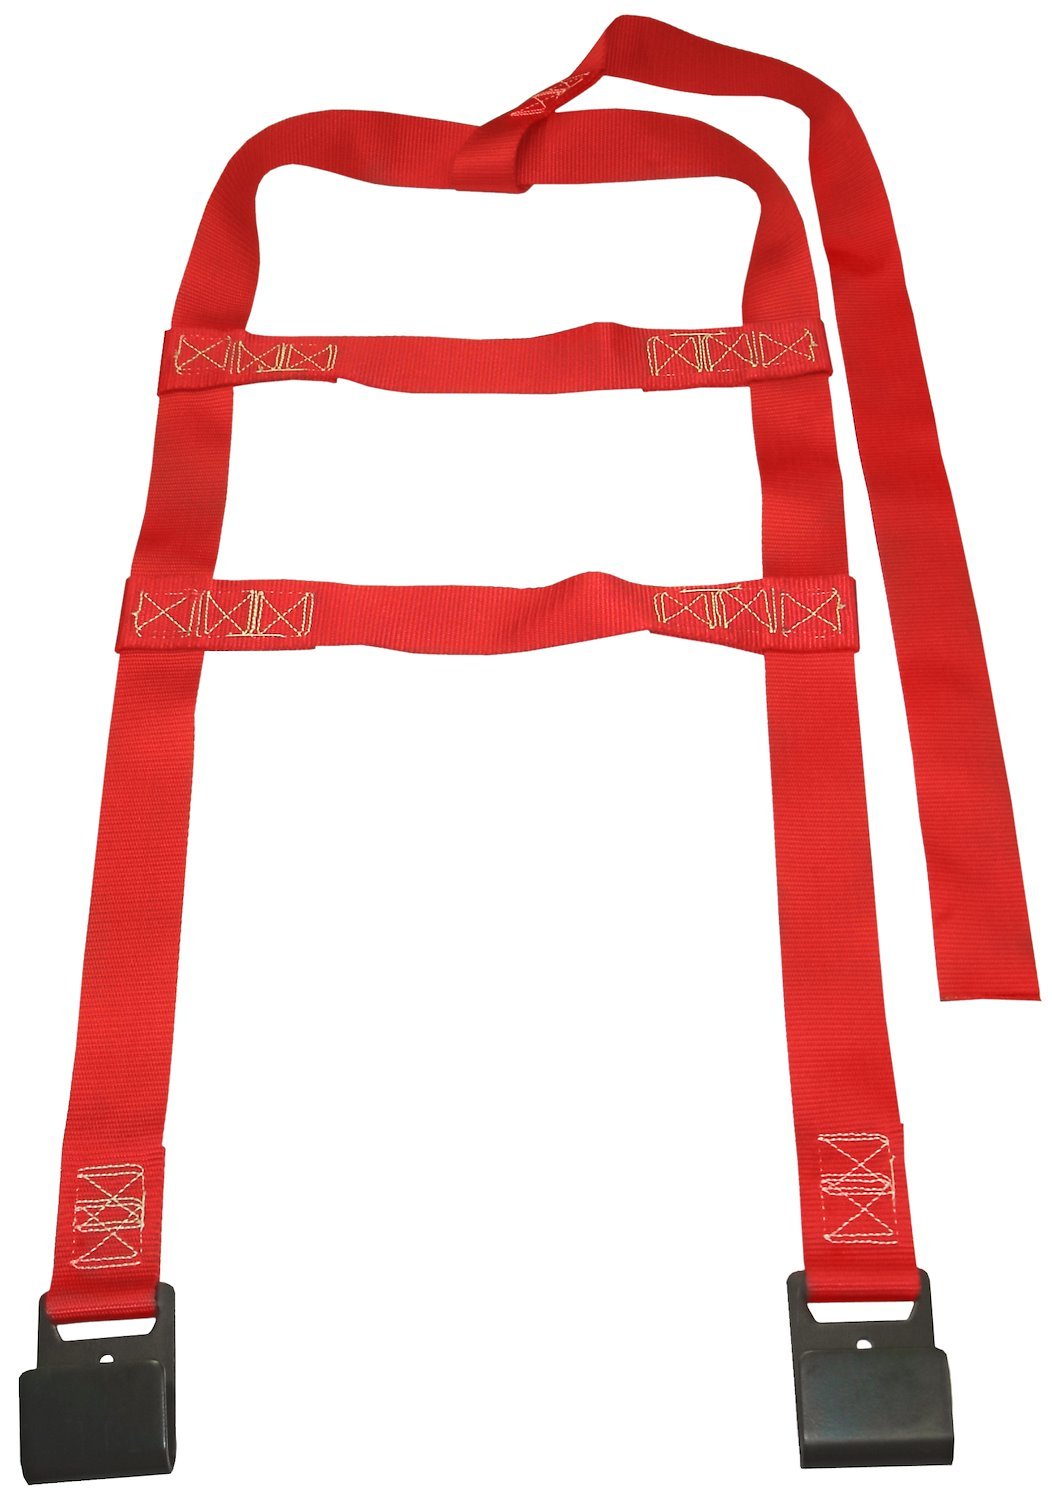 46-700034 Tow Dolly Tie-Down Straps (Red)